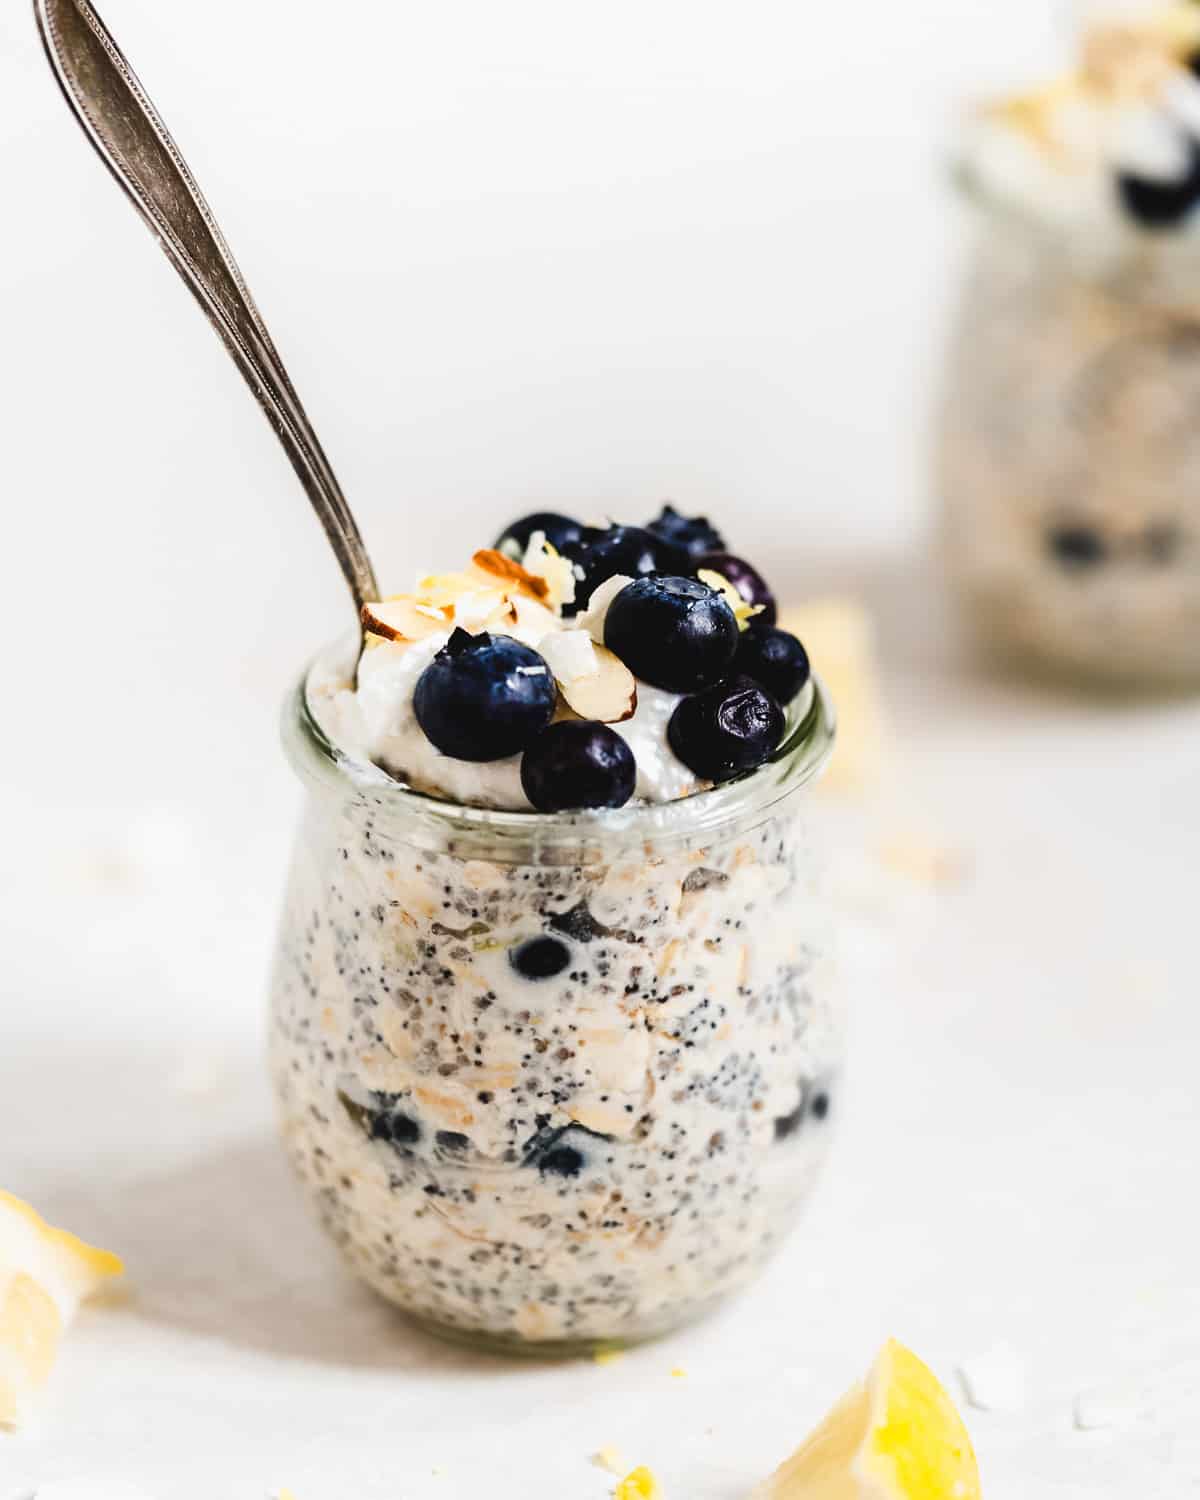 Jar full of oats with blueberries on top and a spoon inside.